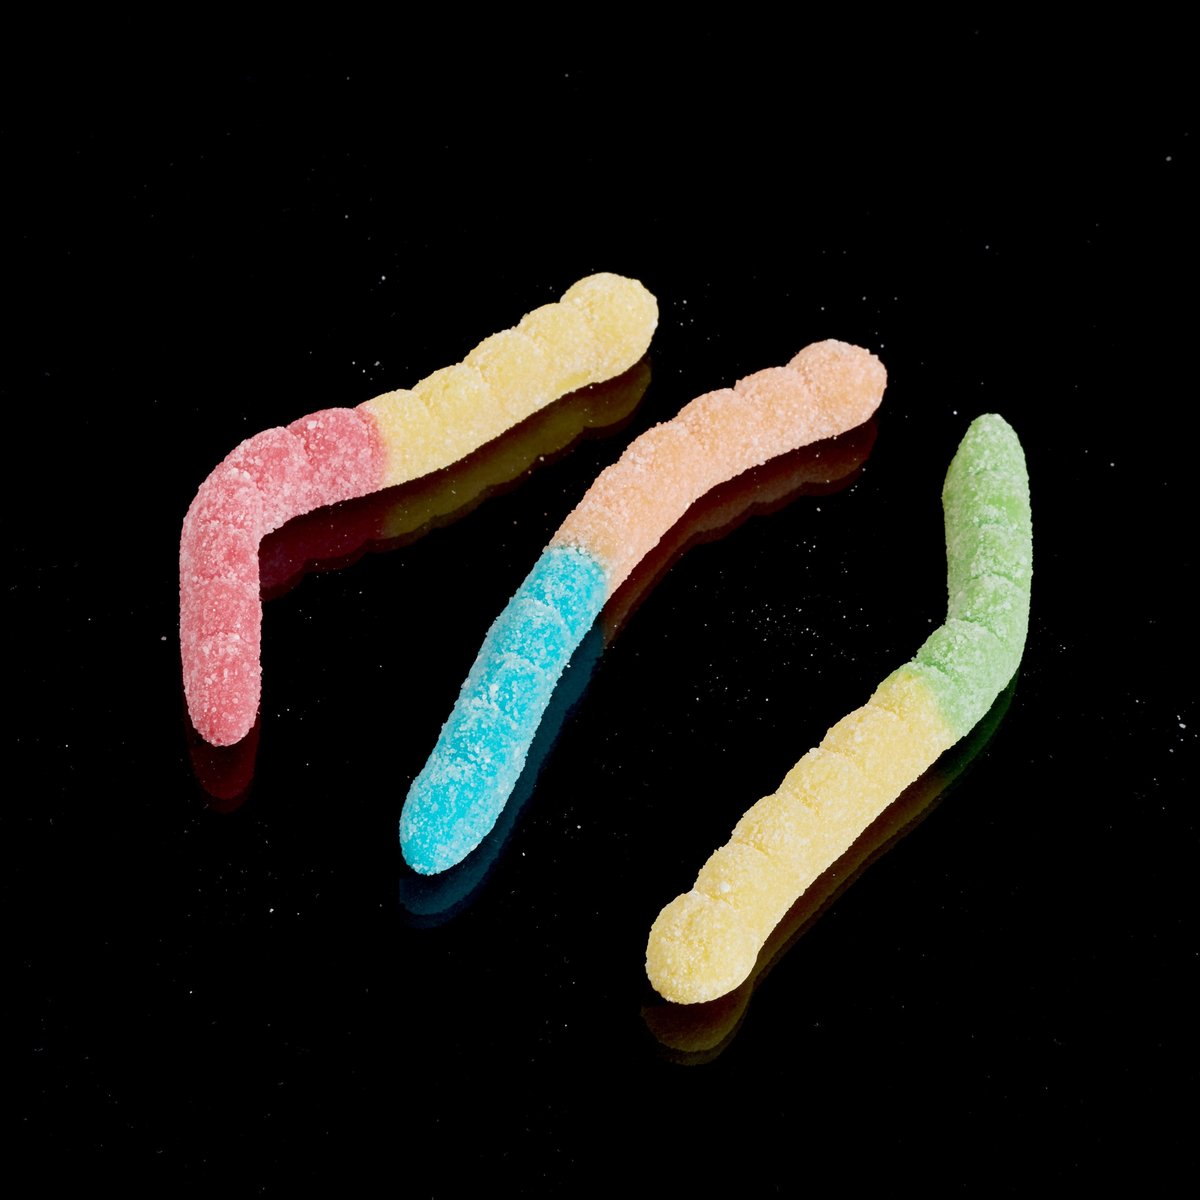 HI ON NATURE GUMMY WORMS 1000mg (100mg Each)